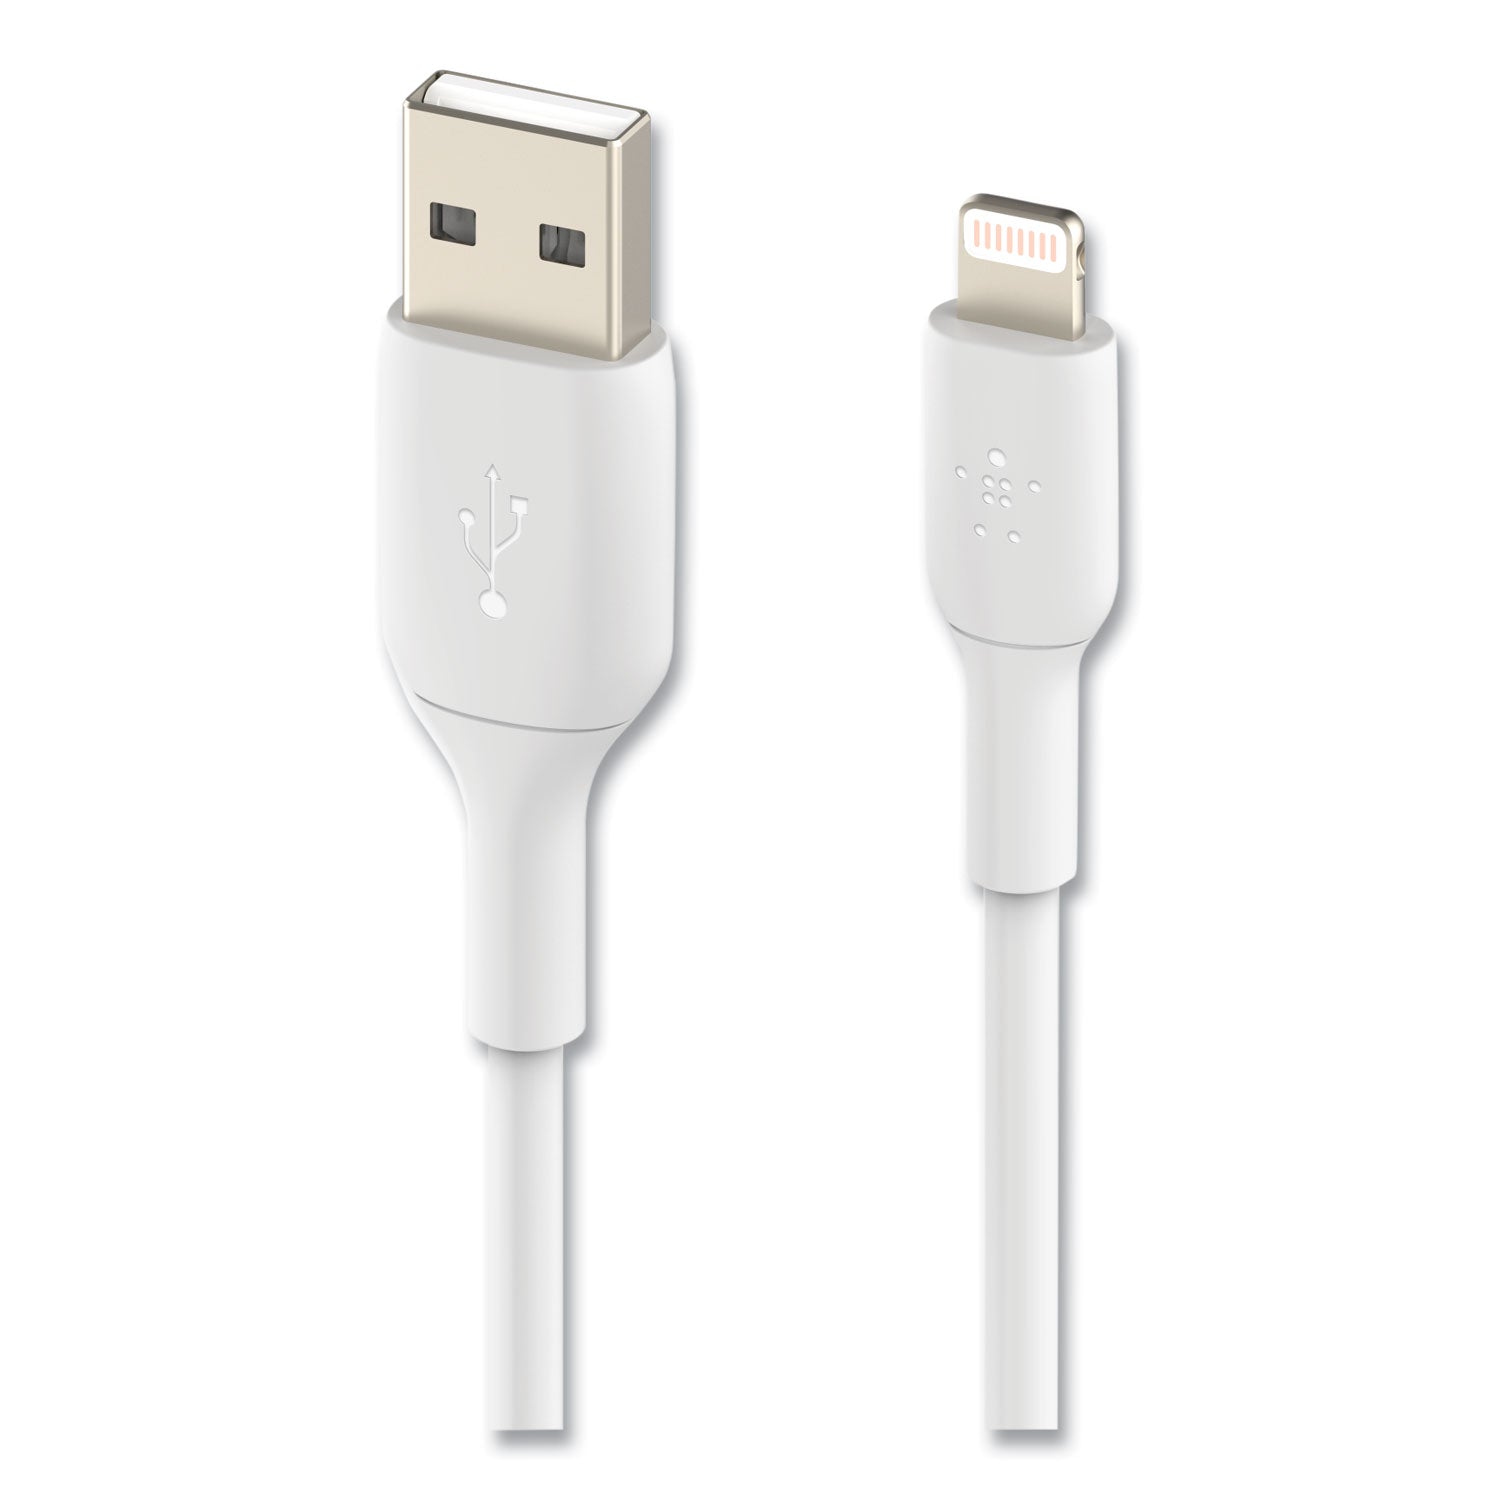 boost-charge-apple-lightning-to-usb-a-chargesync-cable-98-ft-white_blkcaa001bt3mwh - 5